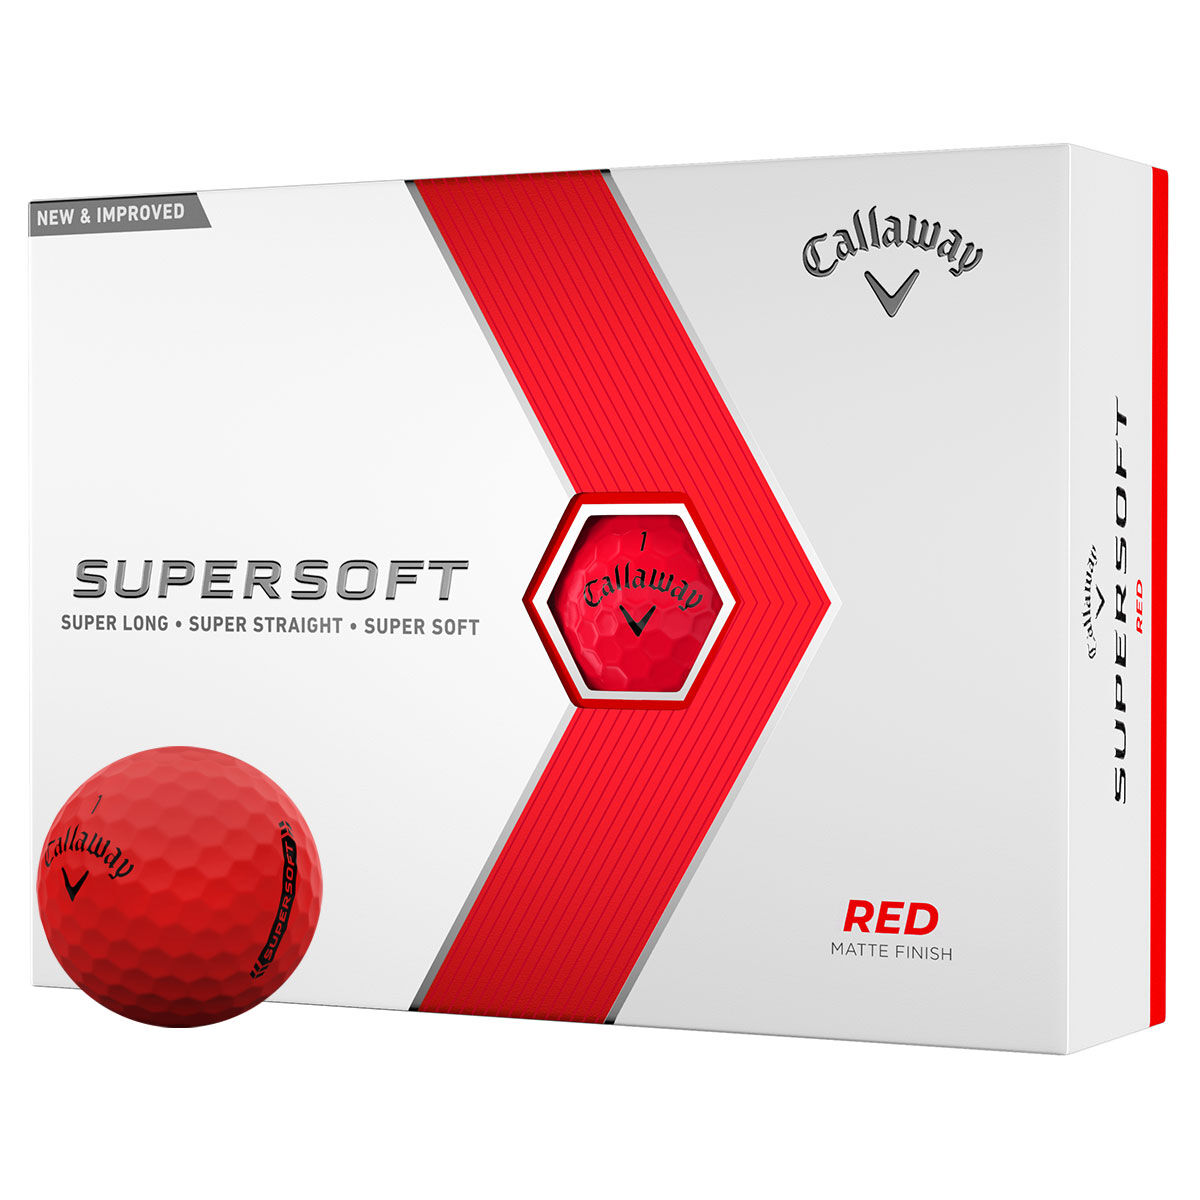 Callaway Golf Red Supersoft 12 Golf Ball Pack | American Golf, One Size